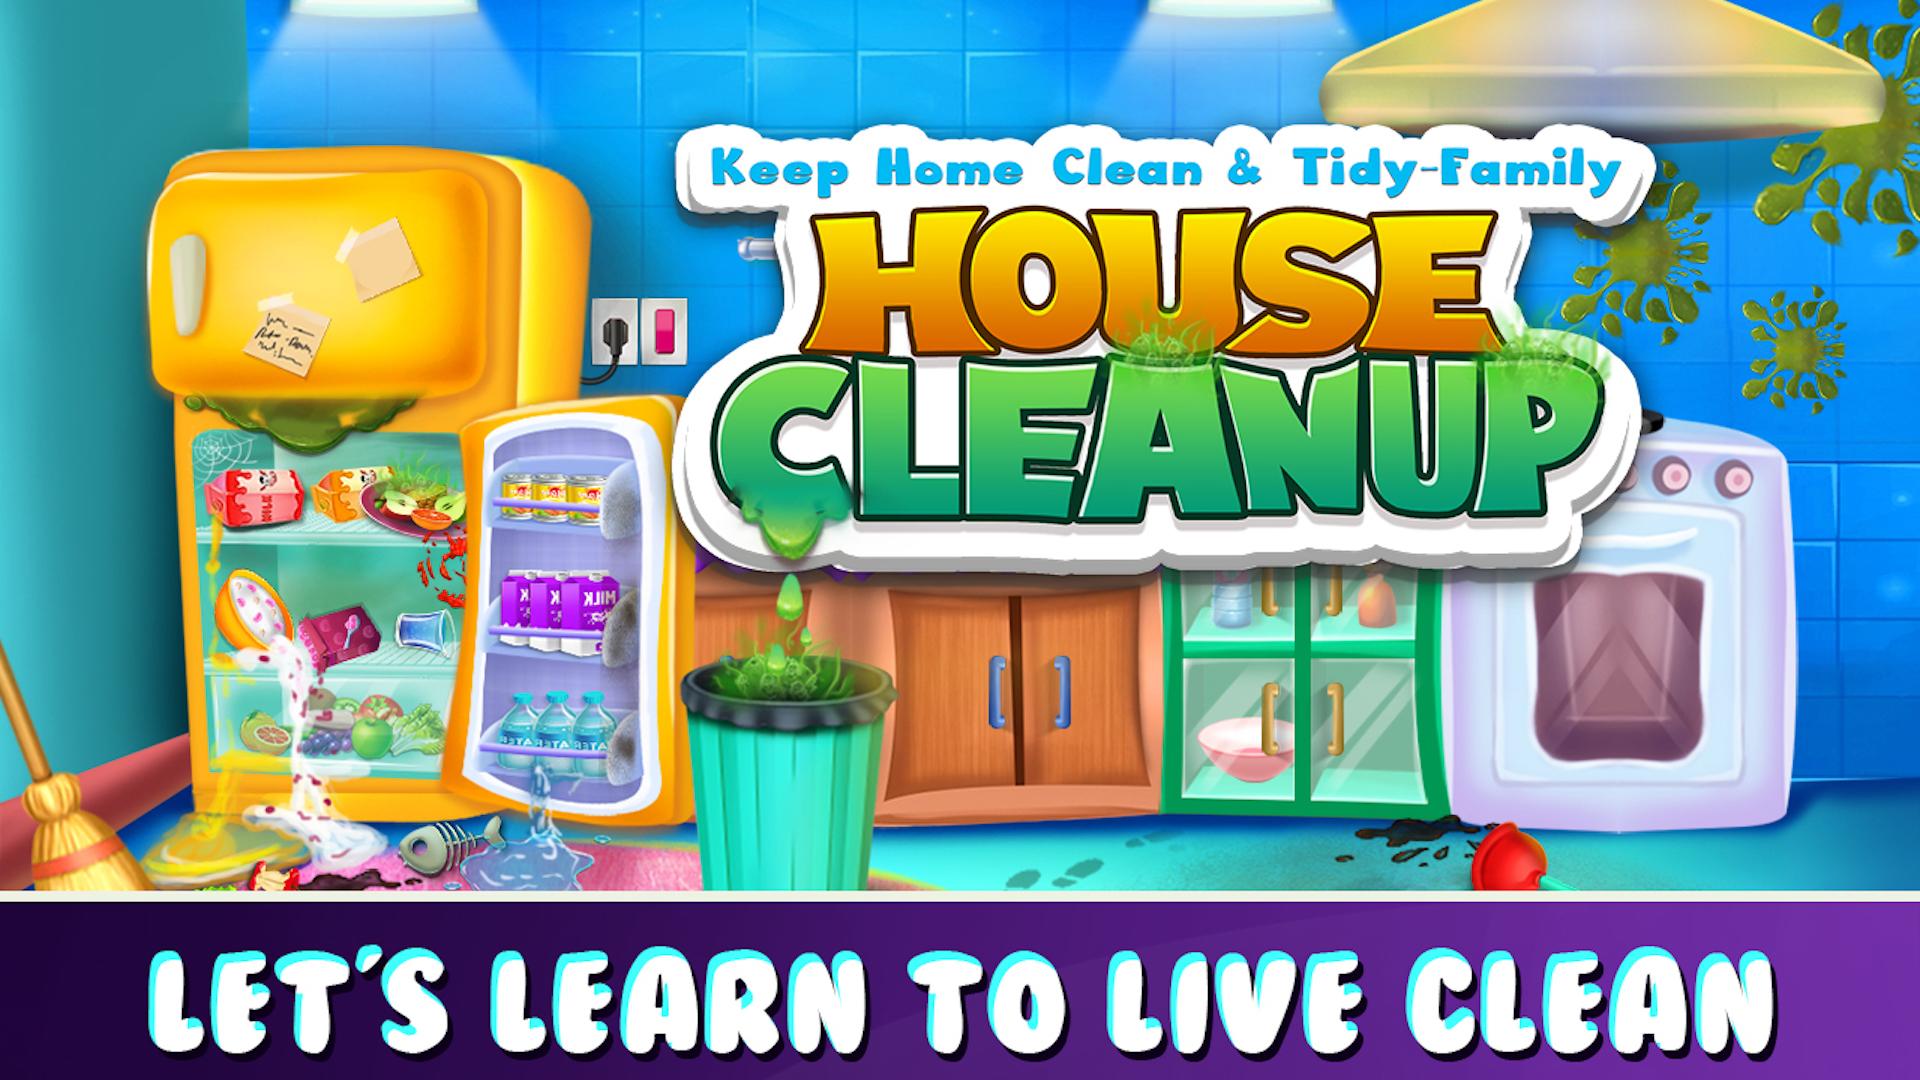 Clean and tidy. Clean tidy. Tidy it up clean House games. Cleaning House all Family.